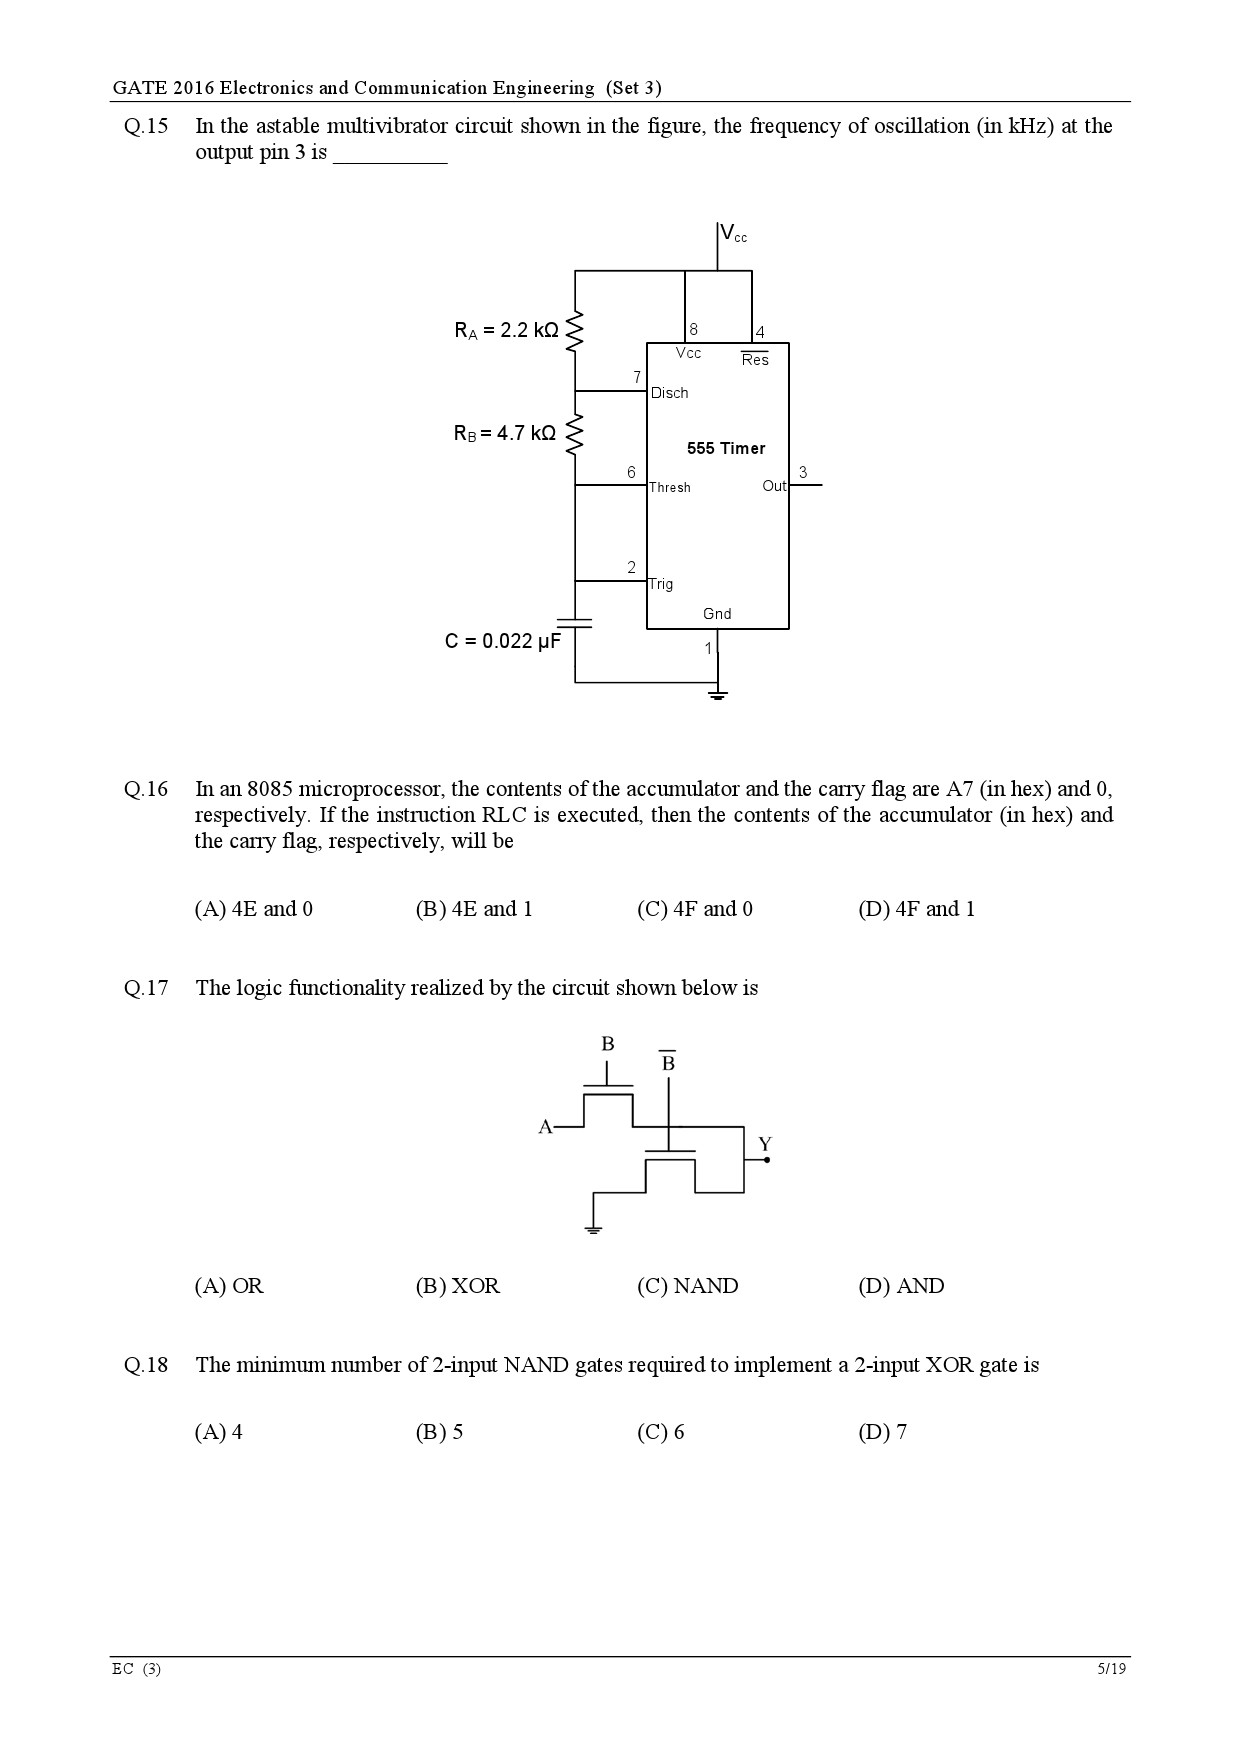 GATE Exam Question Paper 2016 Electronics and Communication Engineering Set 3 8